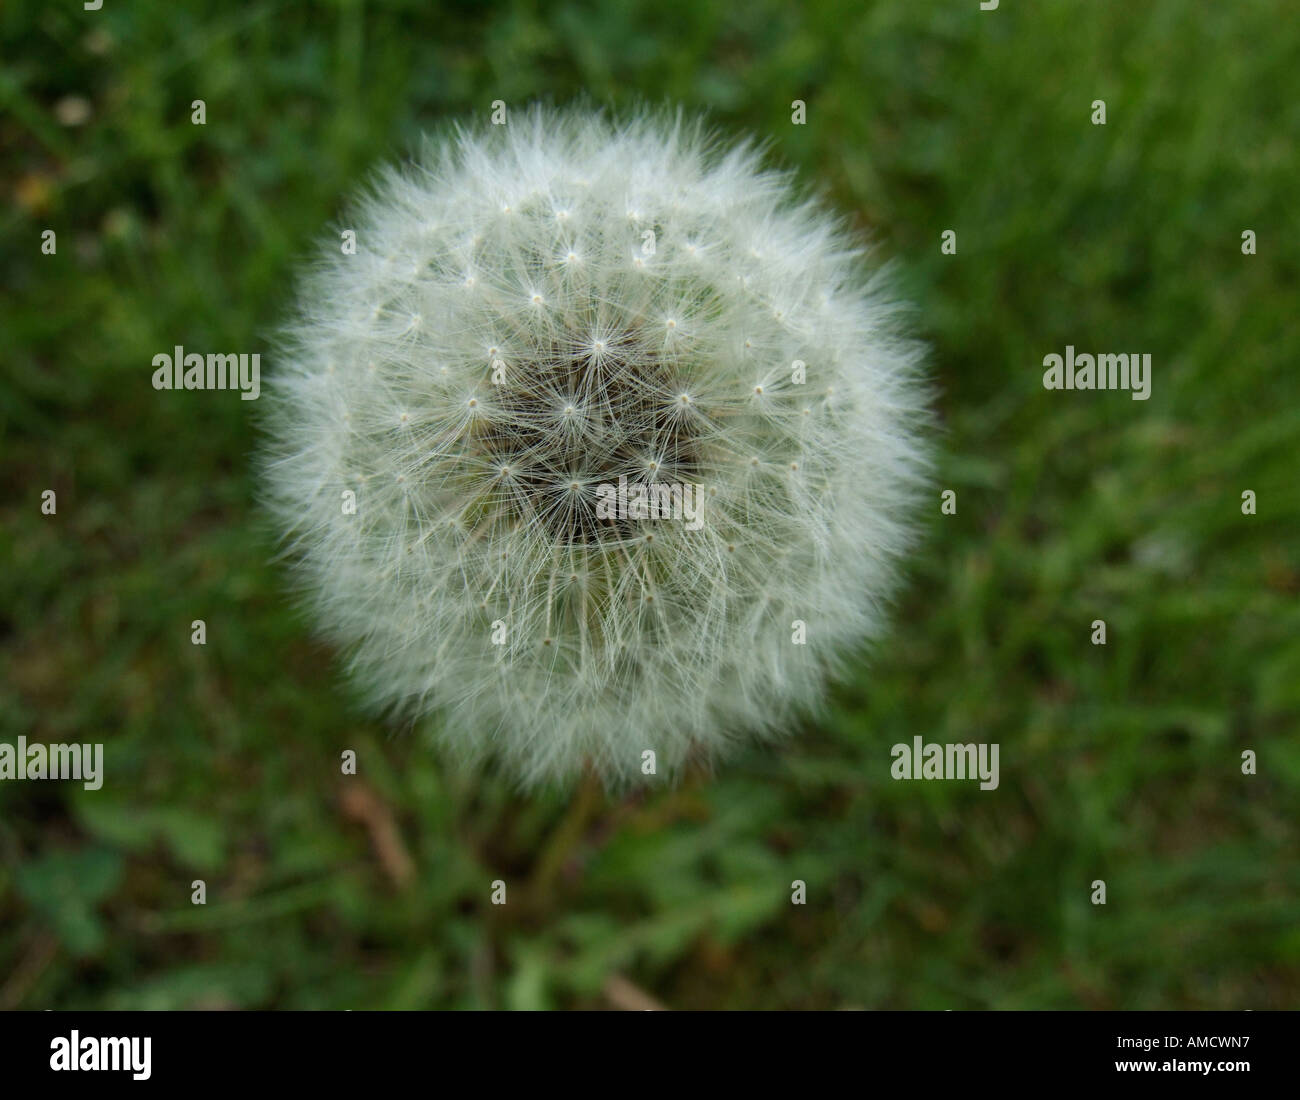 Dandelion close up elevated view Stock Photo